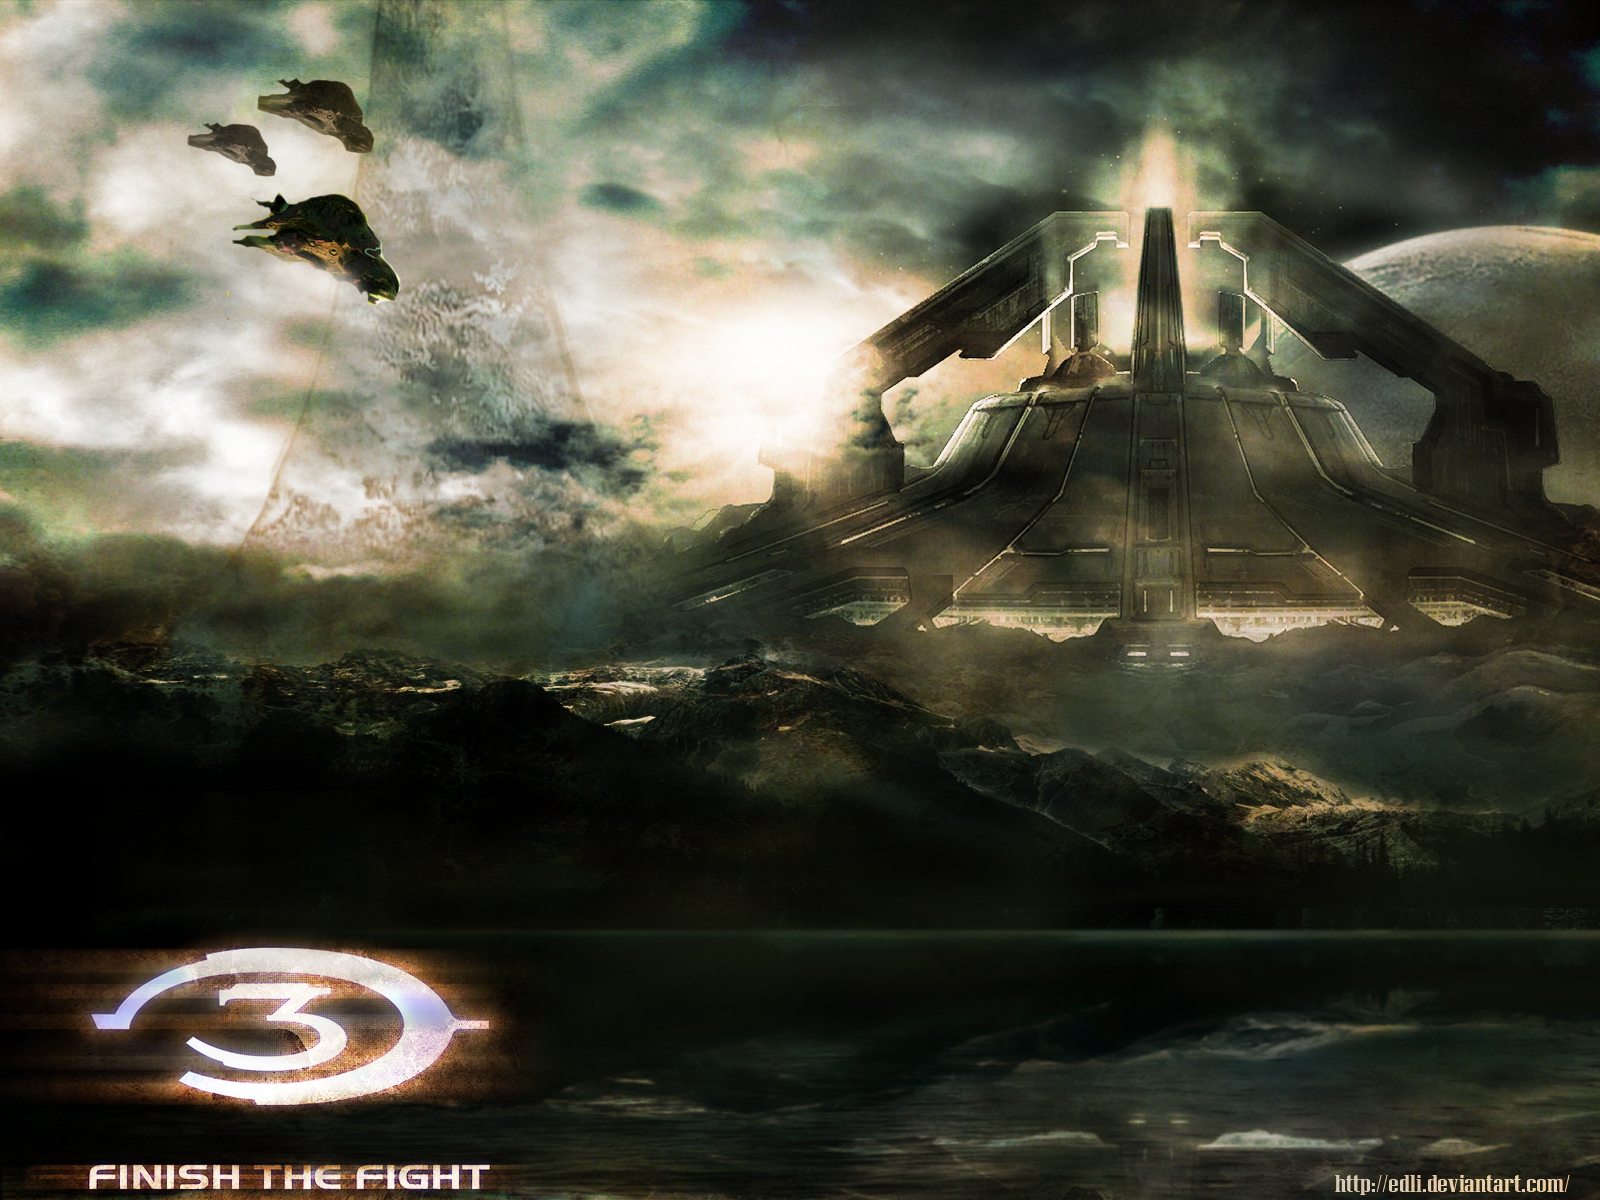 Halo Desktop Wallpaper Background For Windows And Mac Os